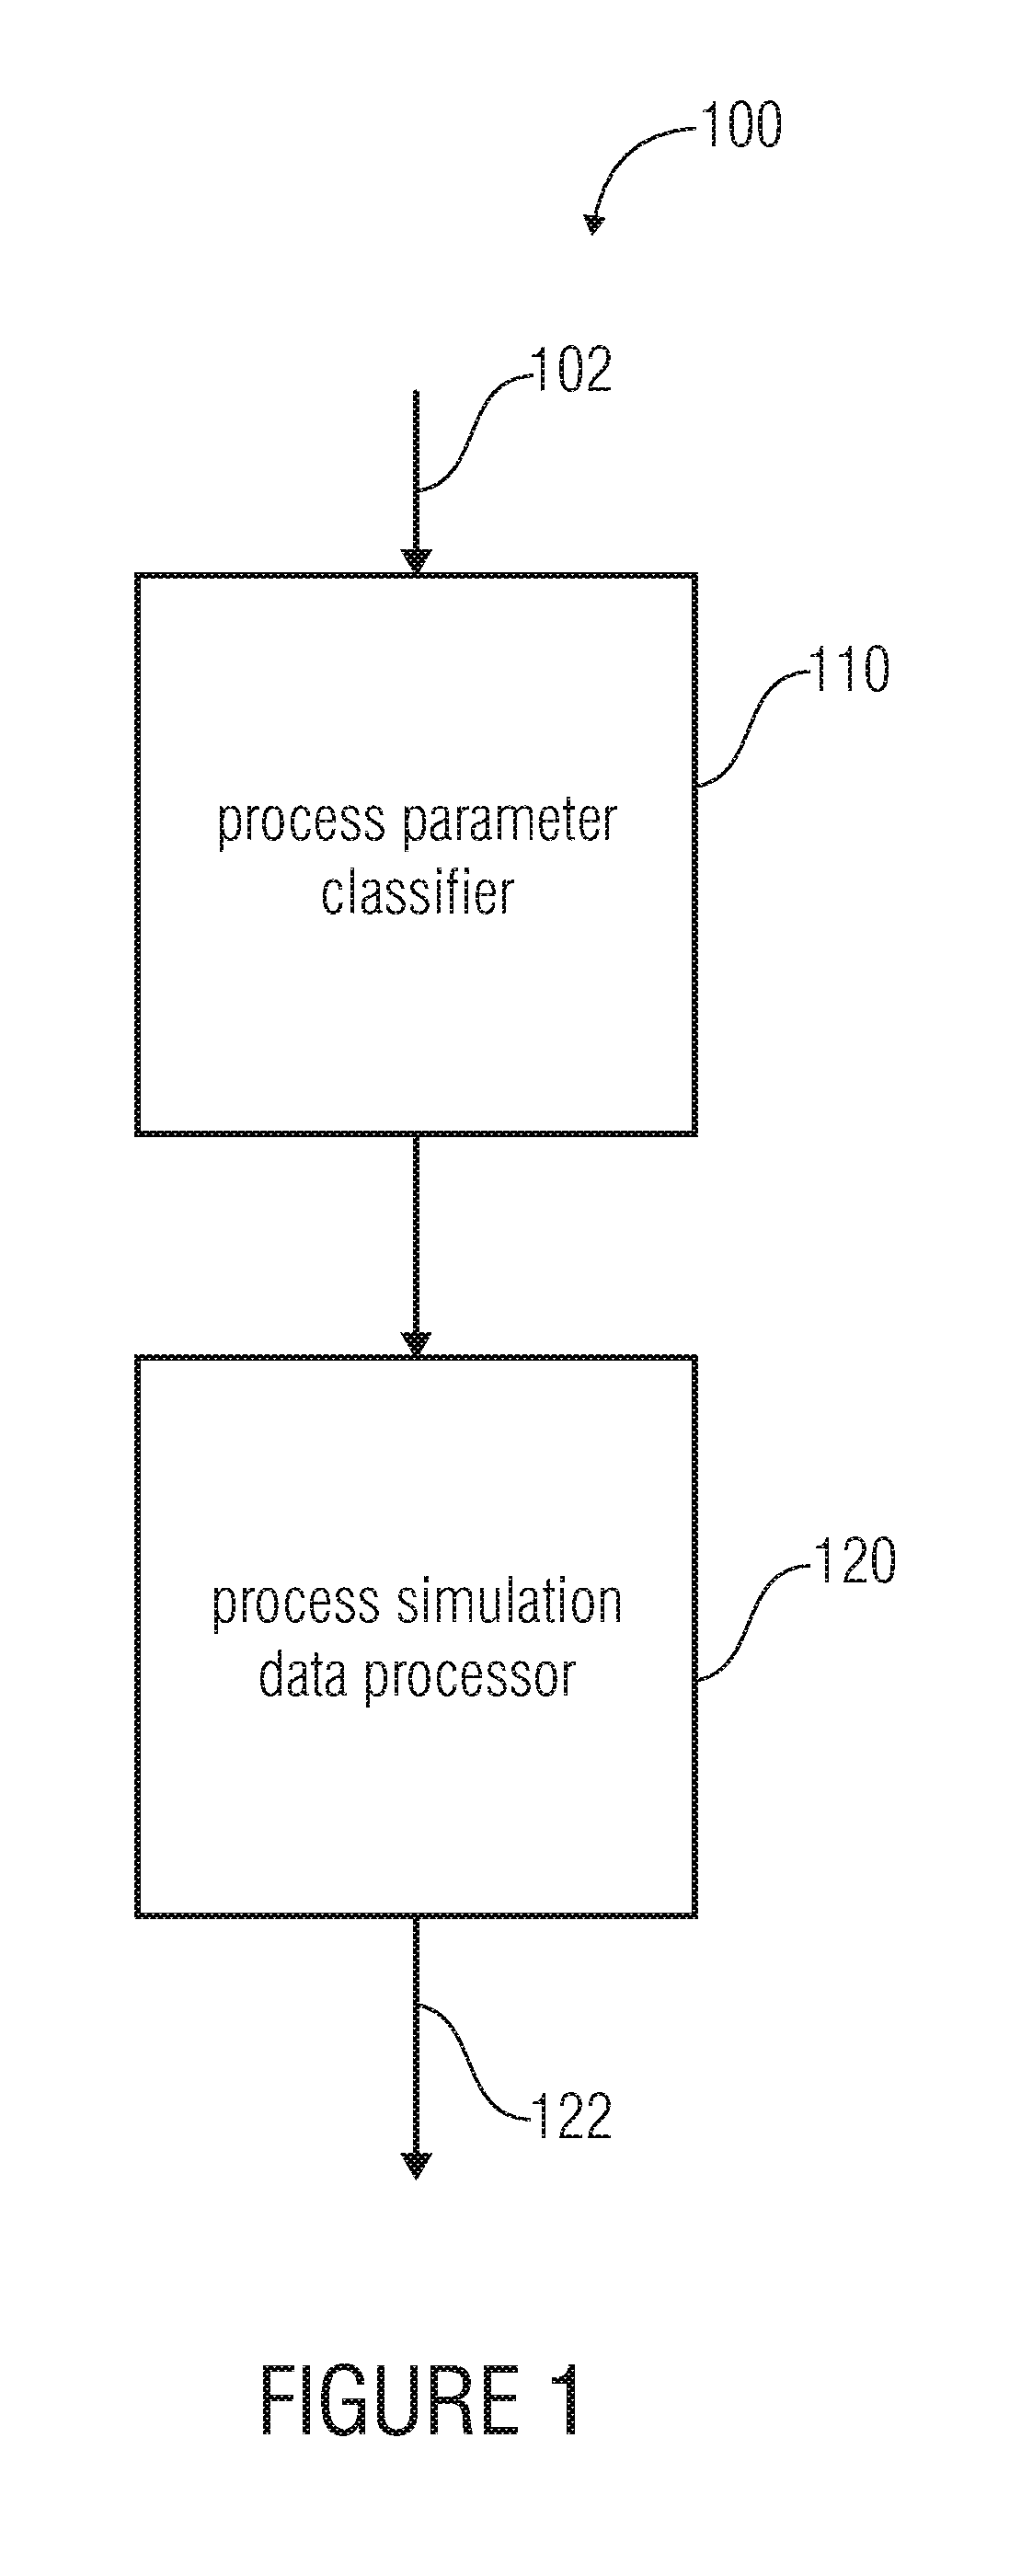 Apparatus and method for processing a process simulation database of a process